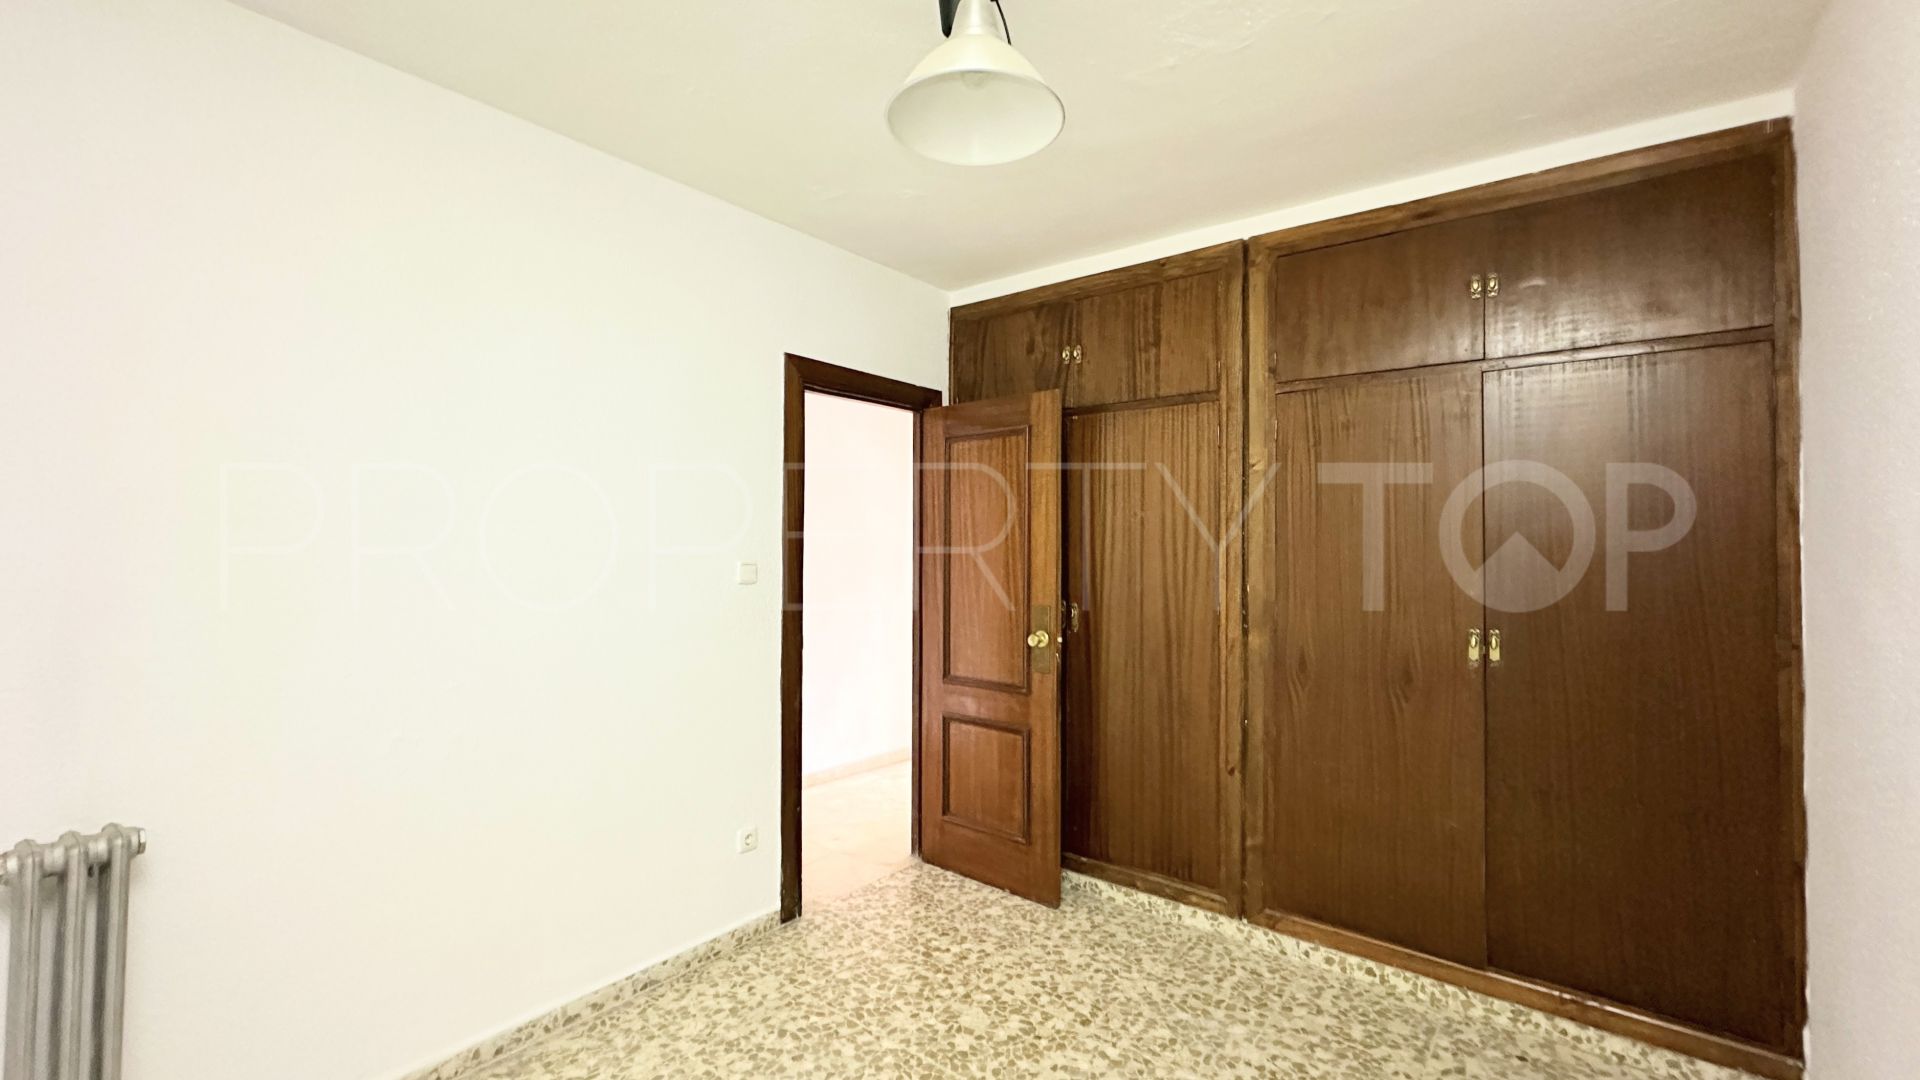 For sale Centro apartment with 5 bedrooms